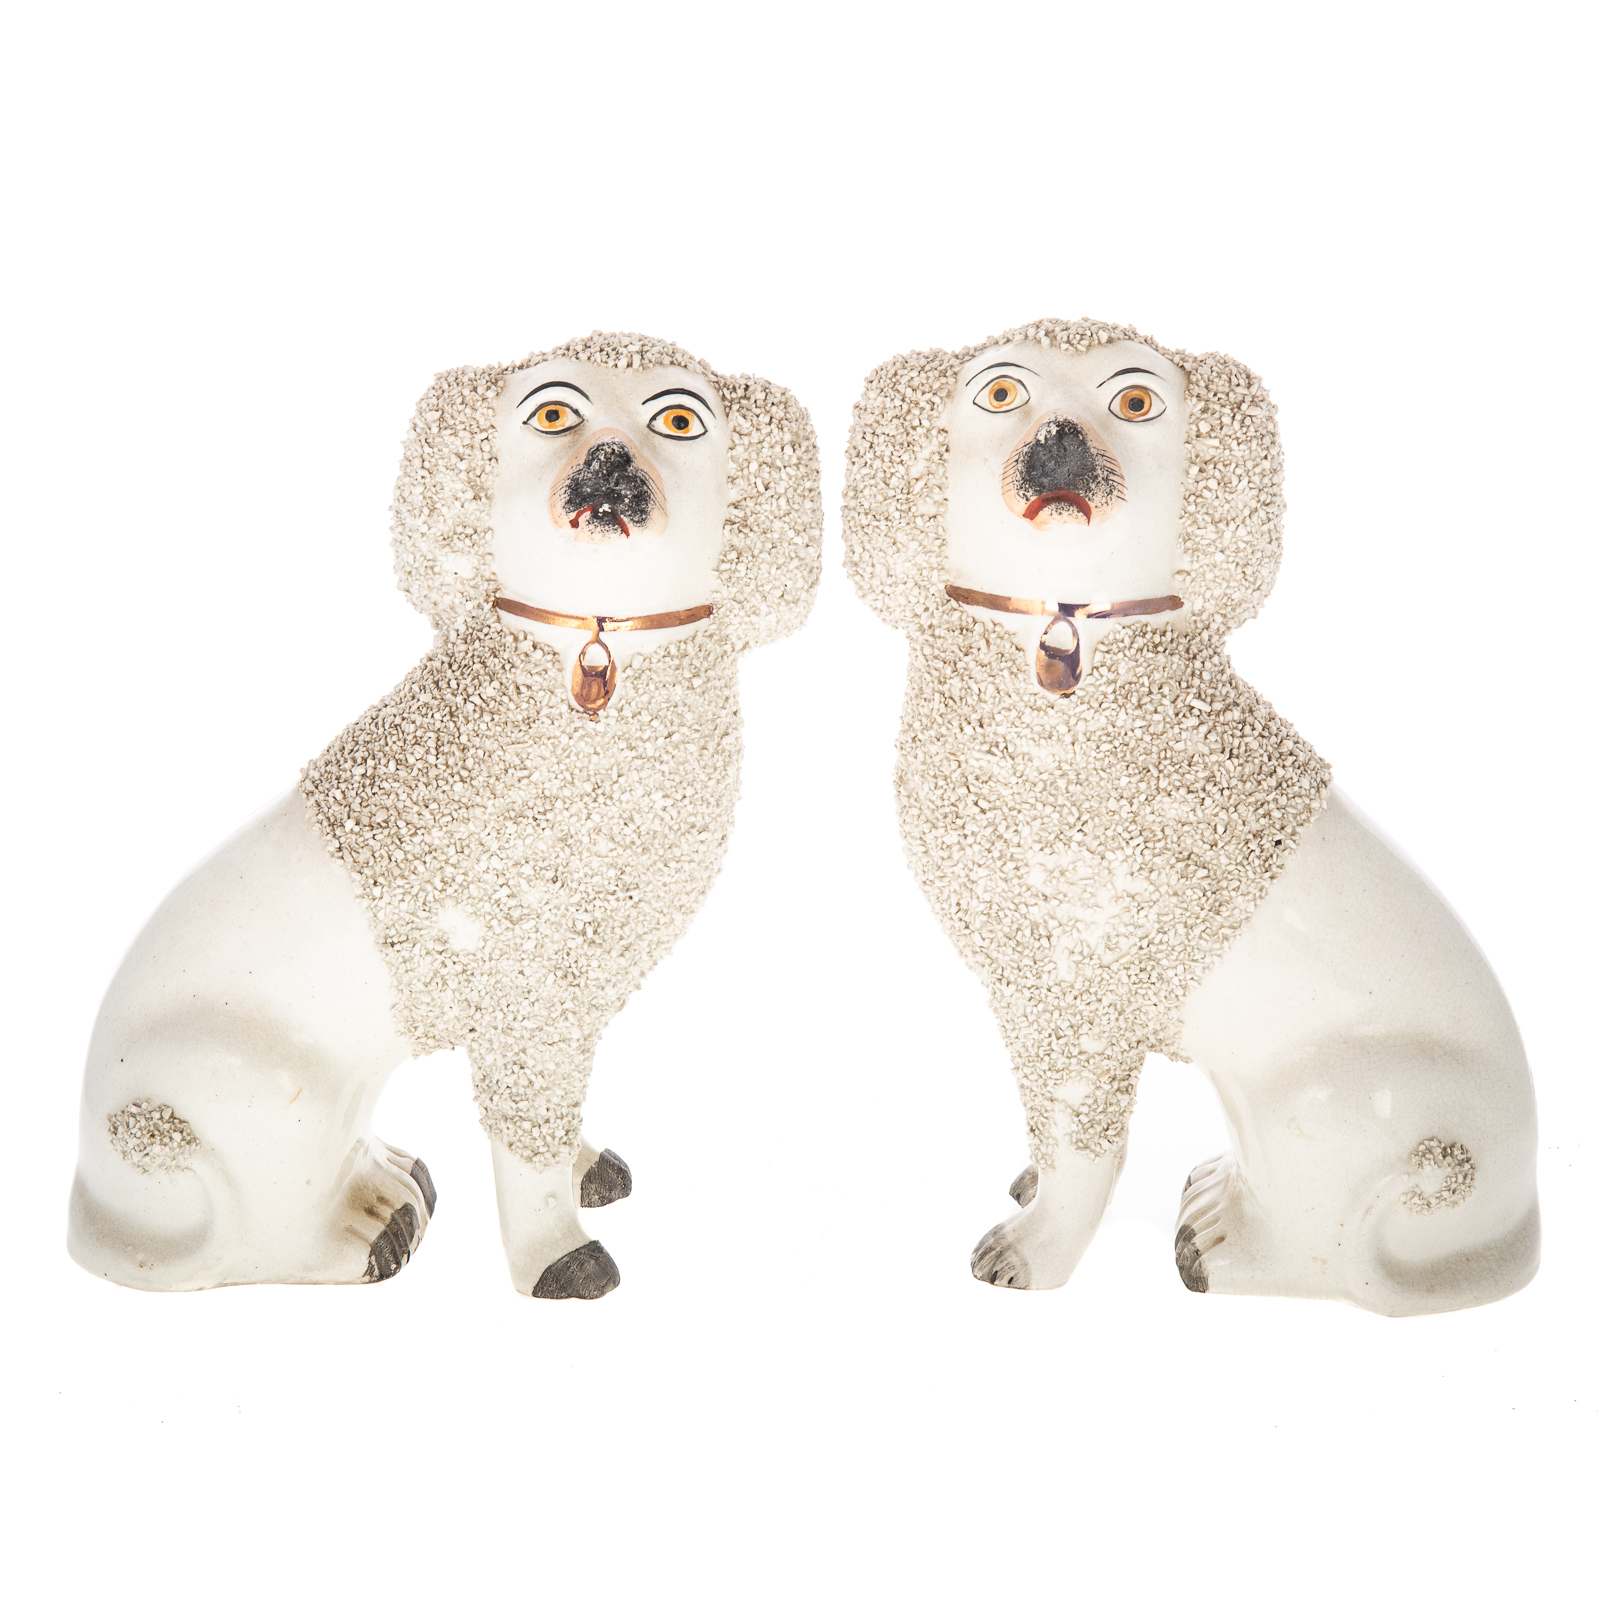 A PAIR OF STAFFORDSHIRE POODLES